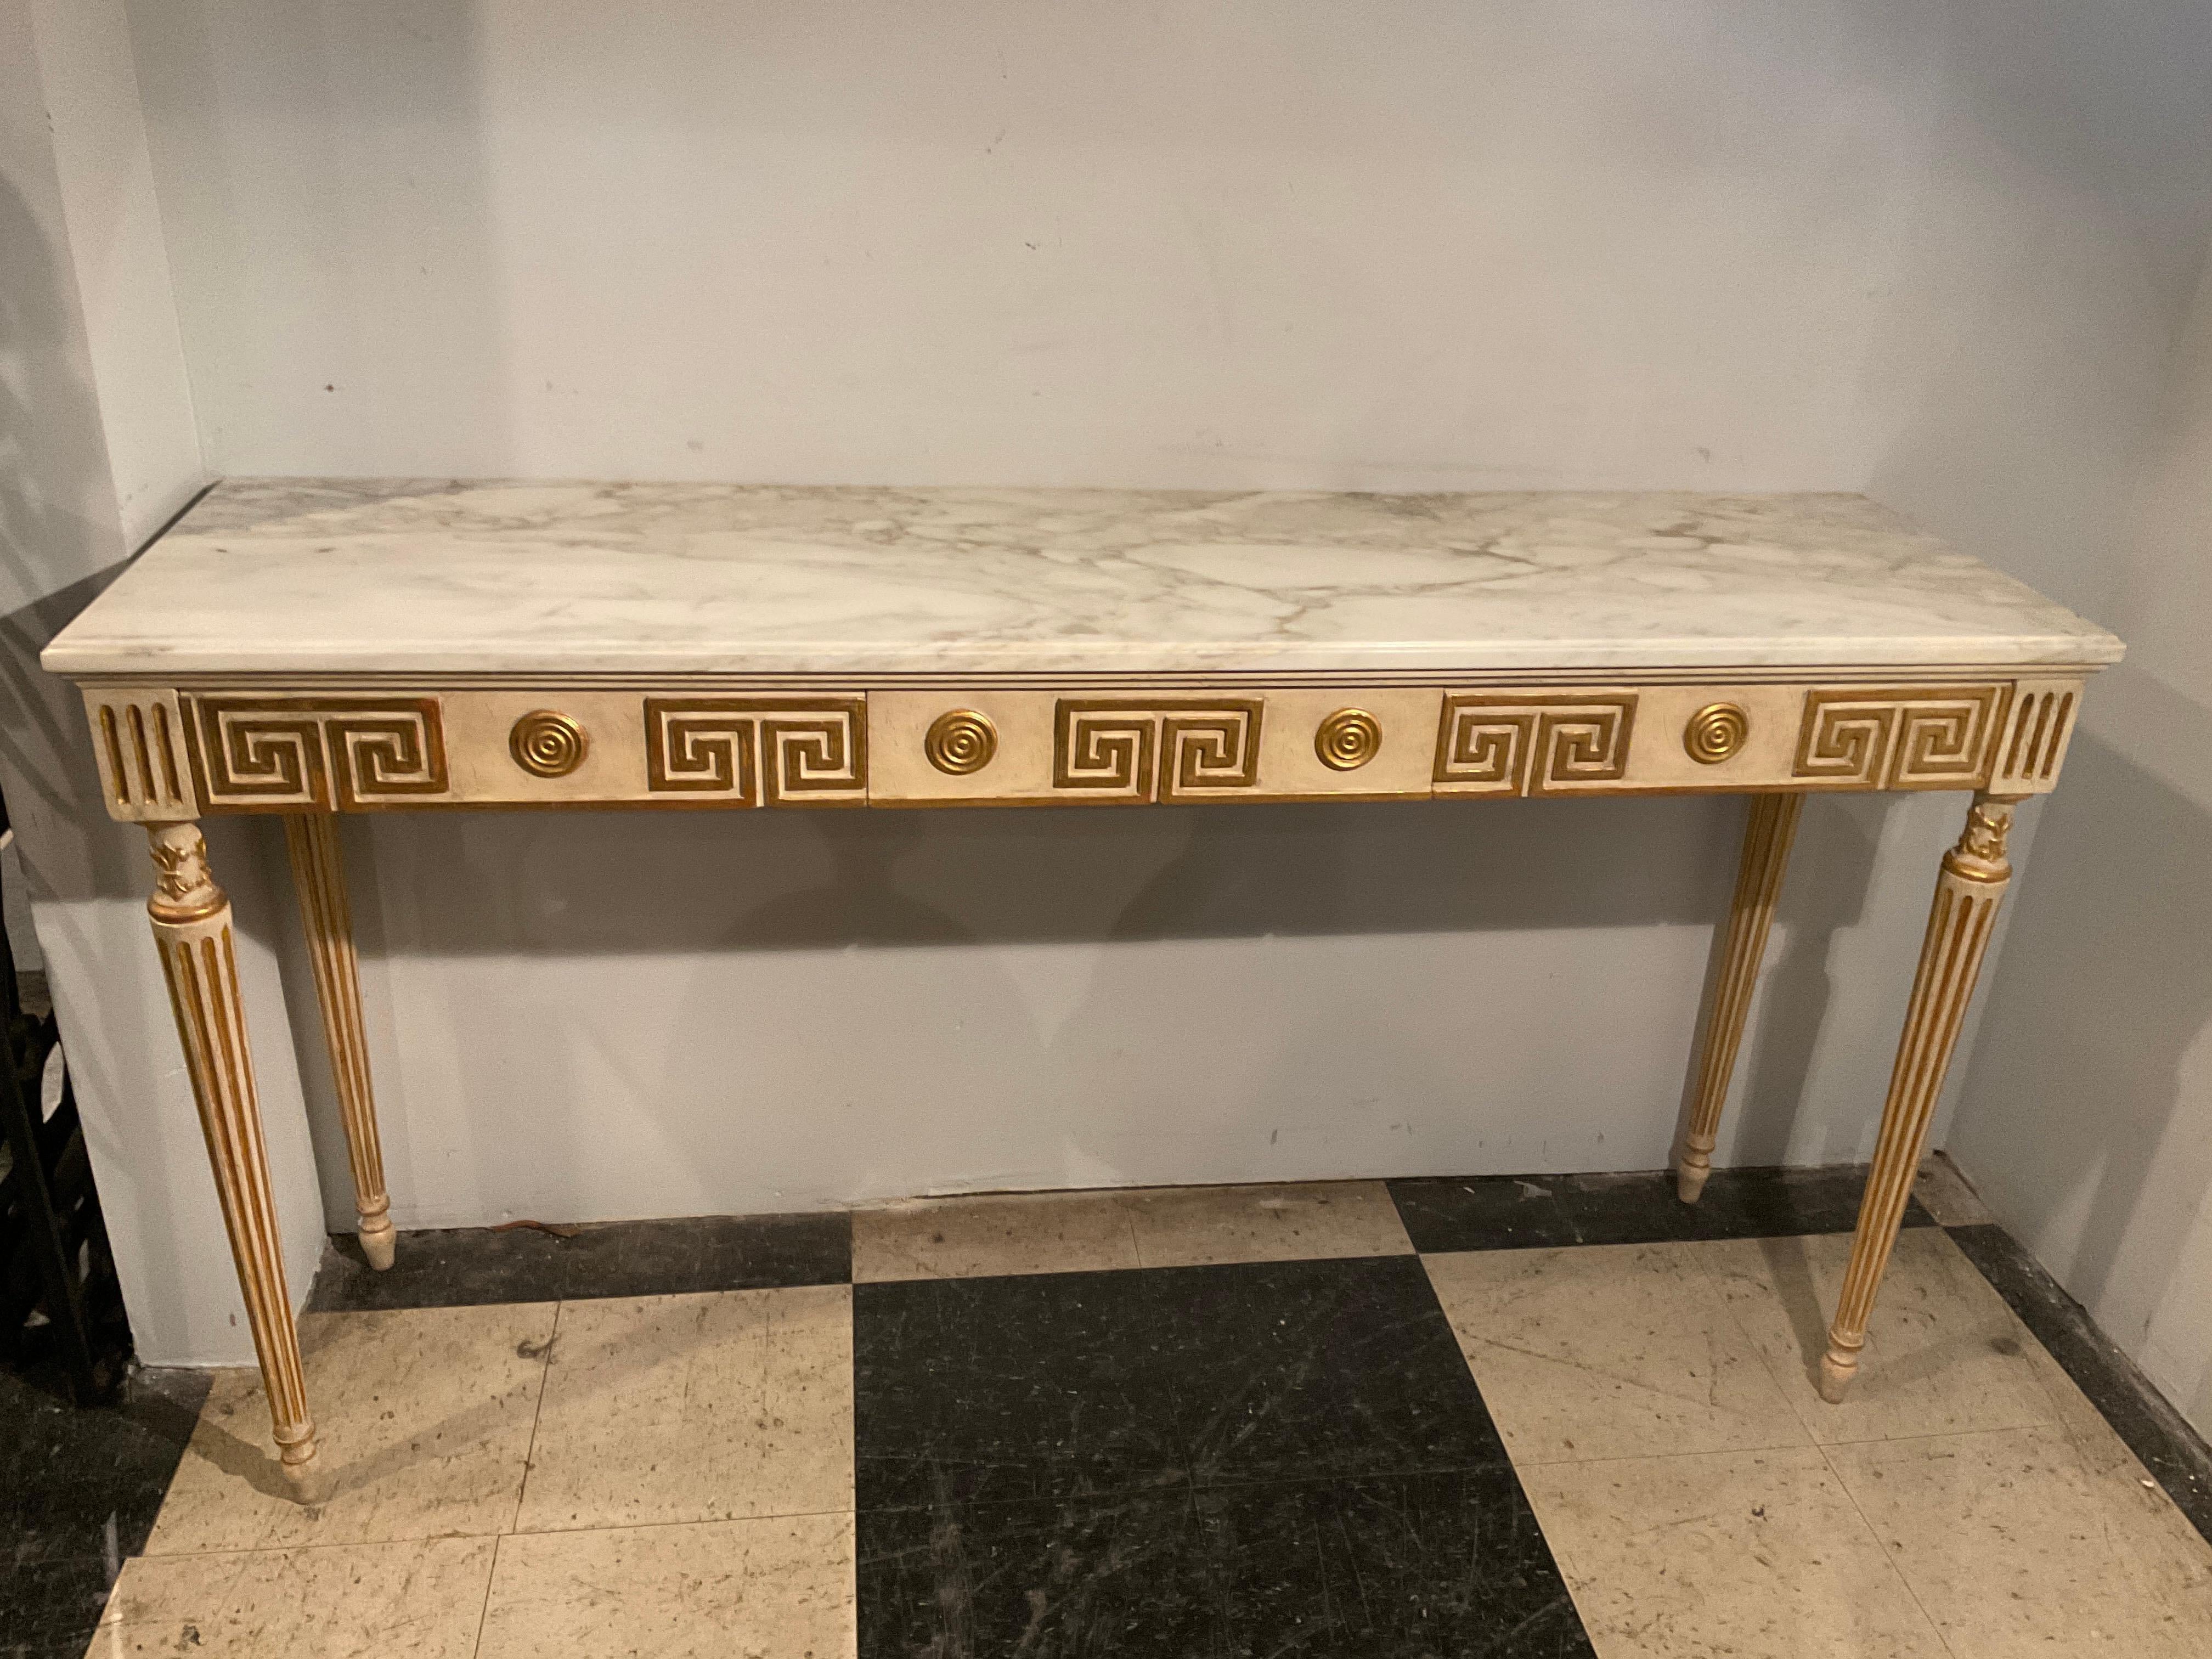 1950s Italian gilt wood Greek key console. Three drawers . Beautiful marble top with light brown veins. Clearance Measurement underneath is 26.75